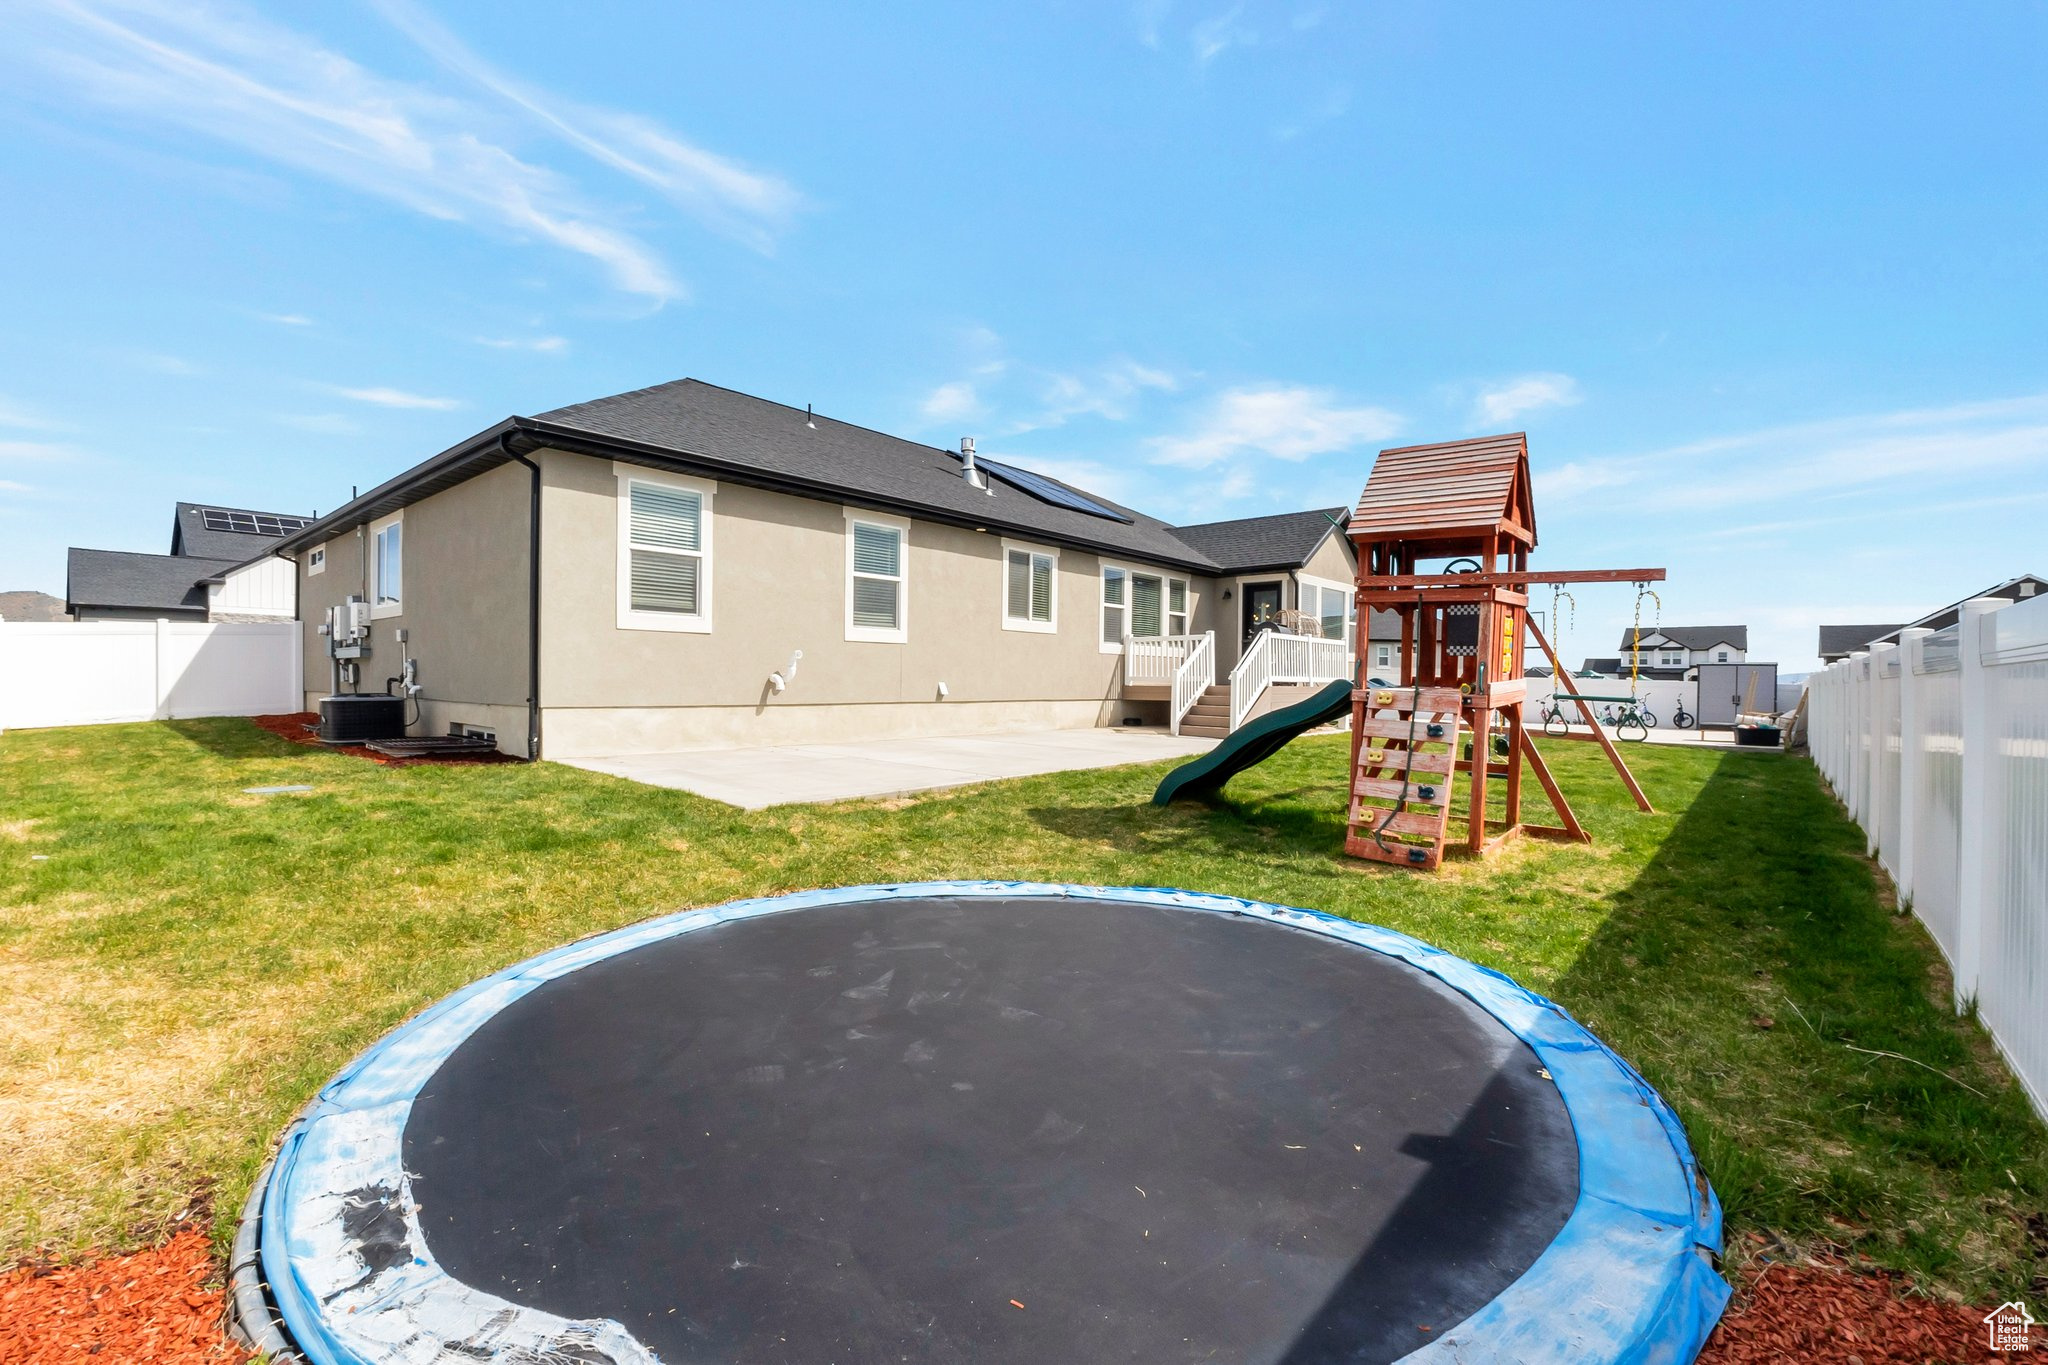 Rear view of property featuring a playground, central AC unit, and a lawn